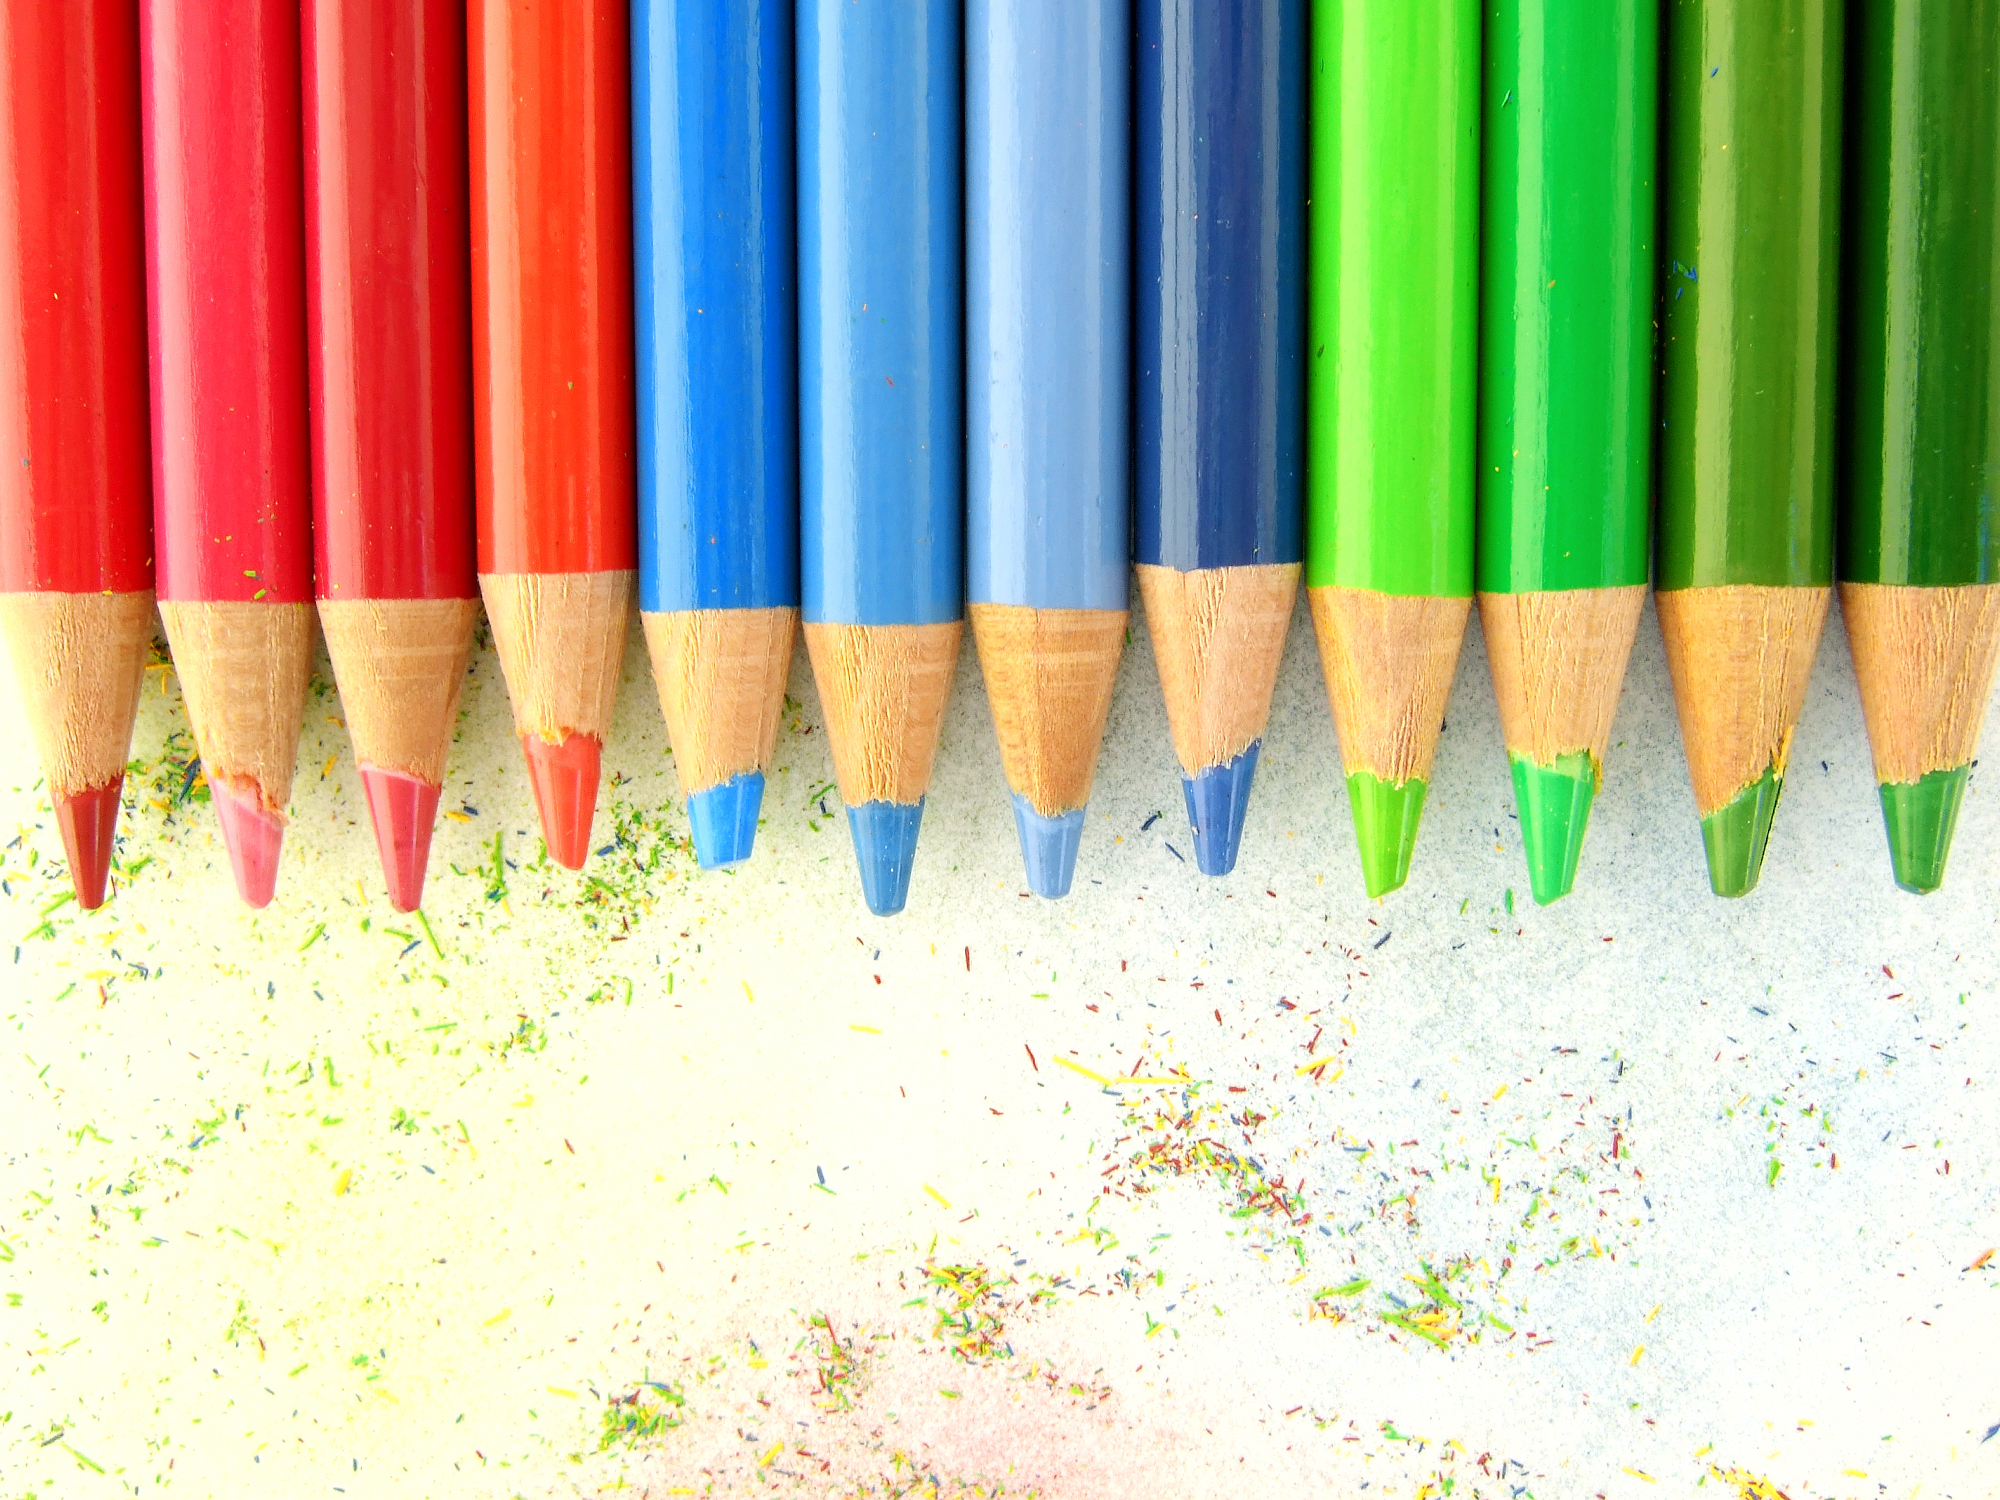 color pencil wallpaper,pencil,office supplies,writing implement,colorfulness,stationery